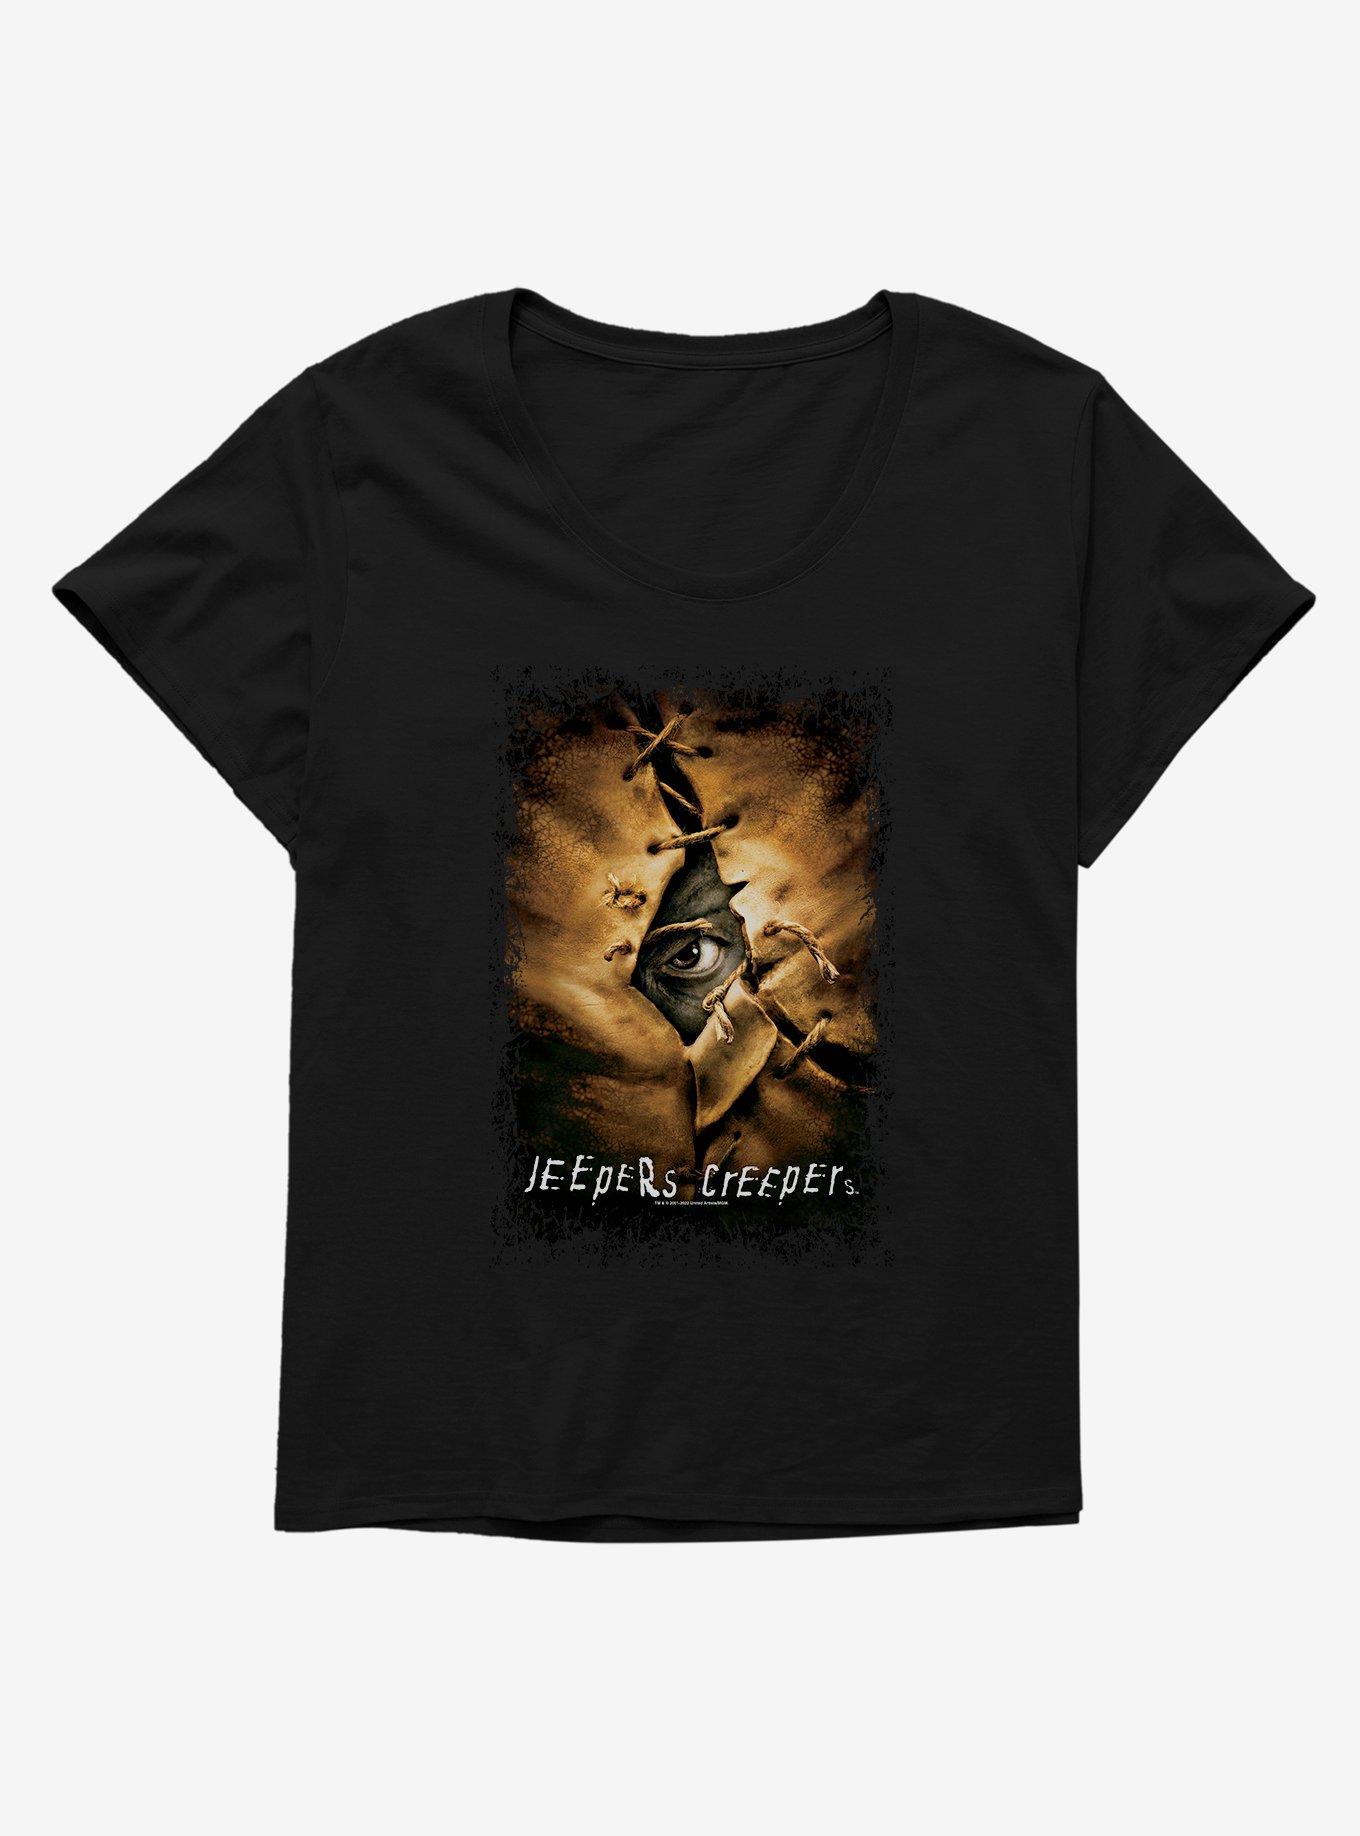 Jeepers Creepers Poster Girls T-Shirt Plus Size, BLACK, hi-res